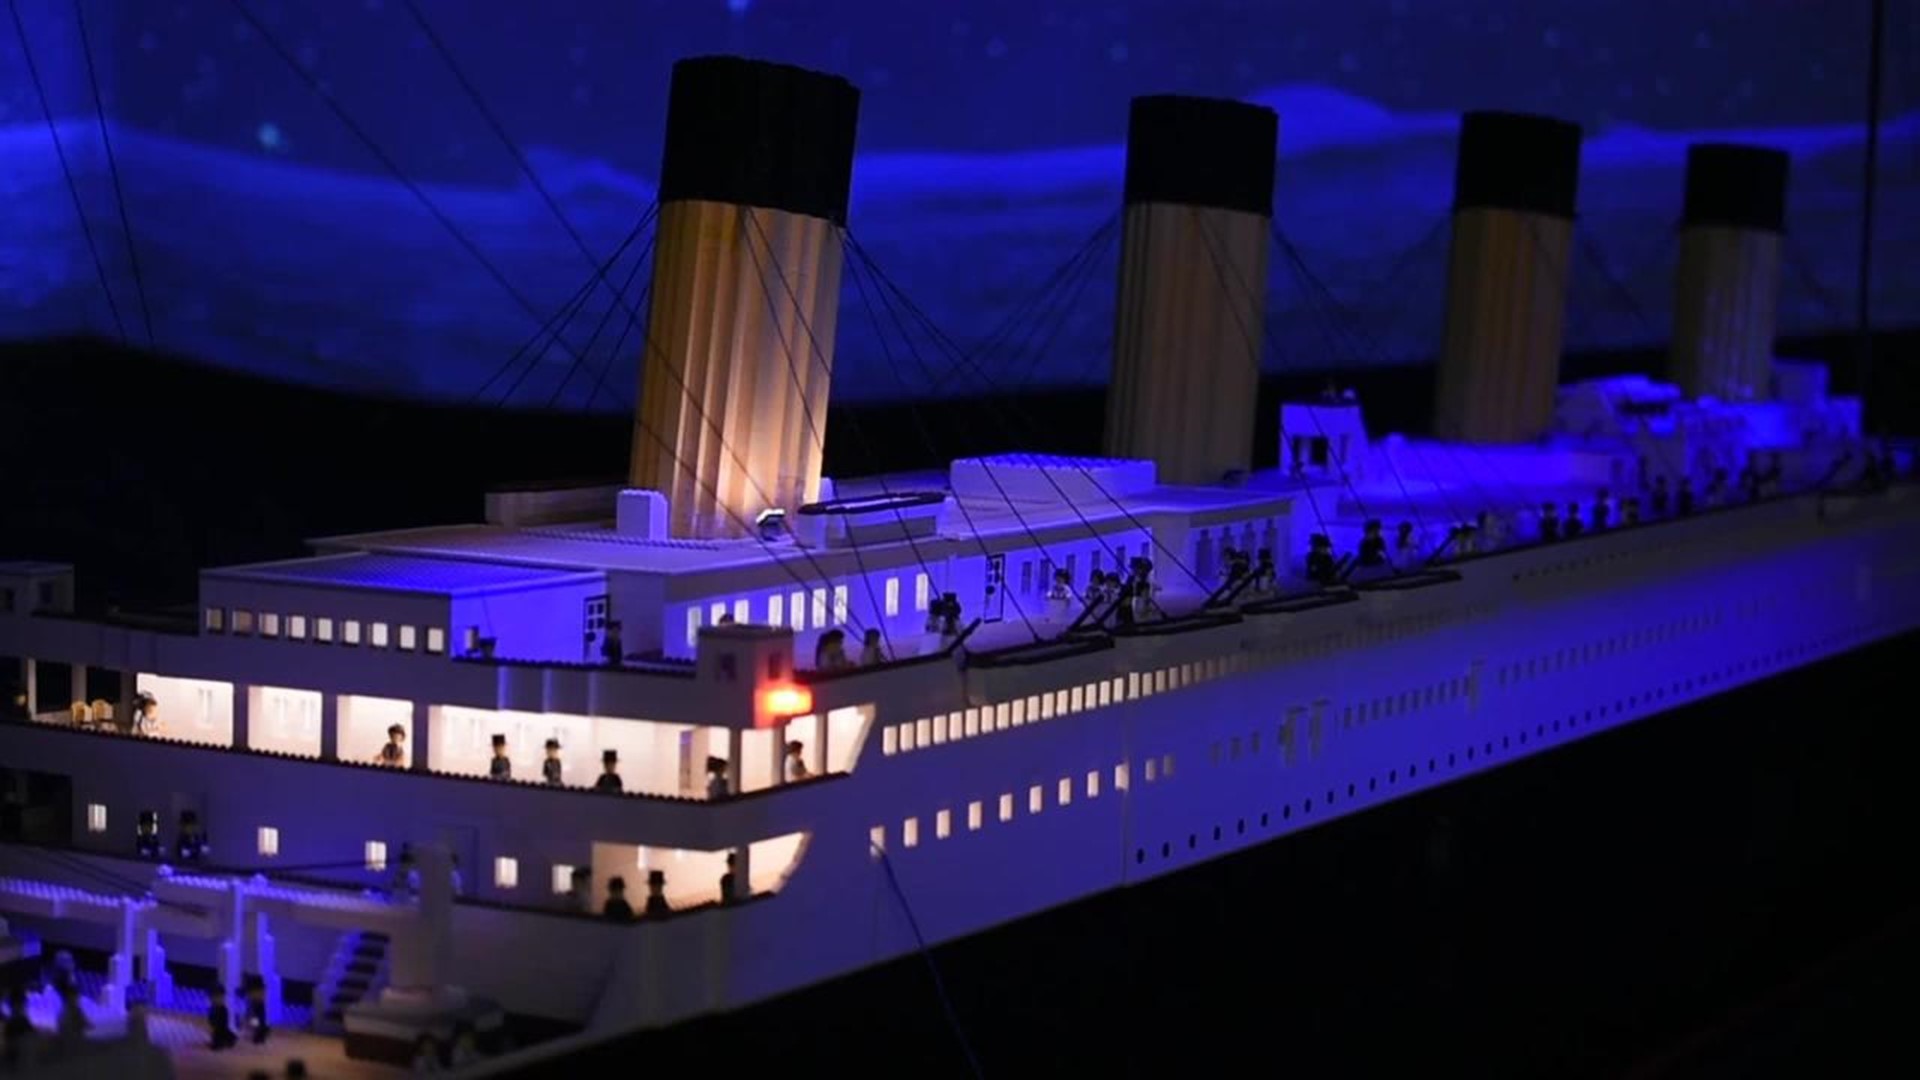 26-foot Lego Titanic built by Icelandic boy now display in Pigeon Forge | kagstv.com